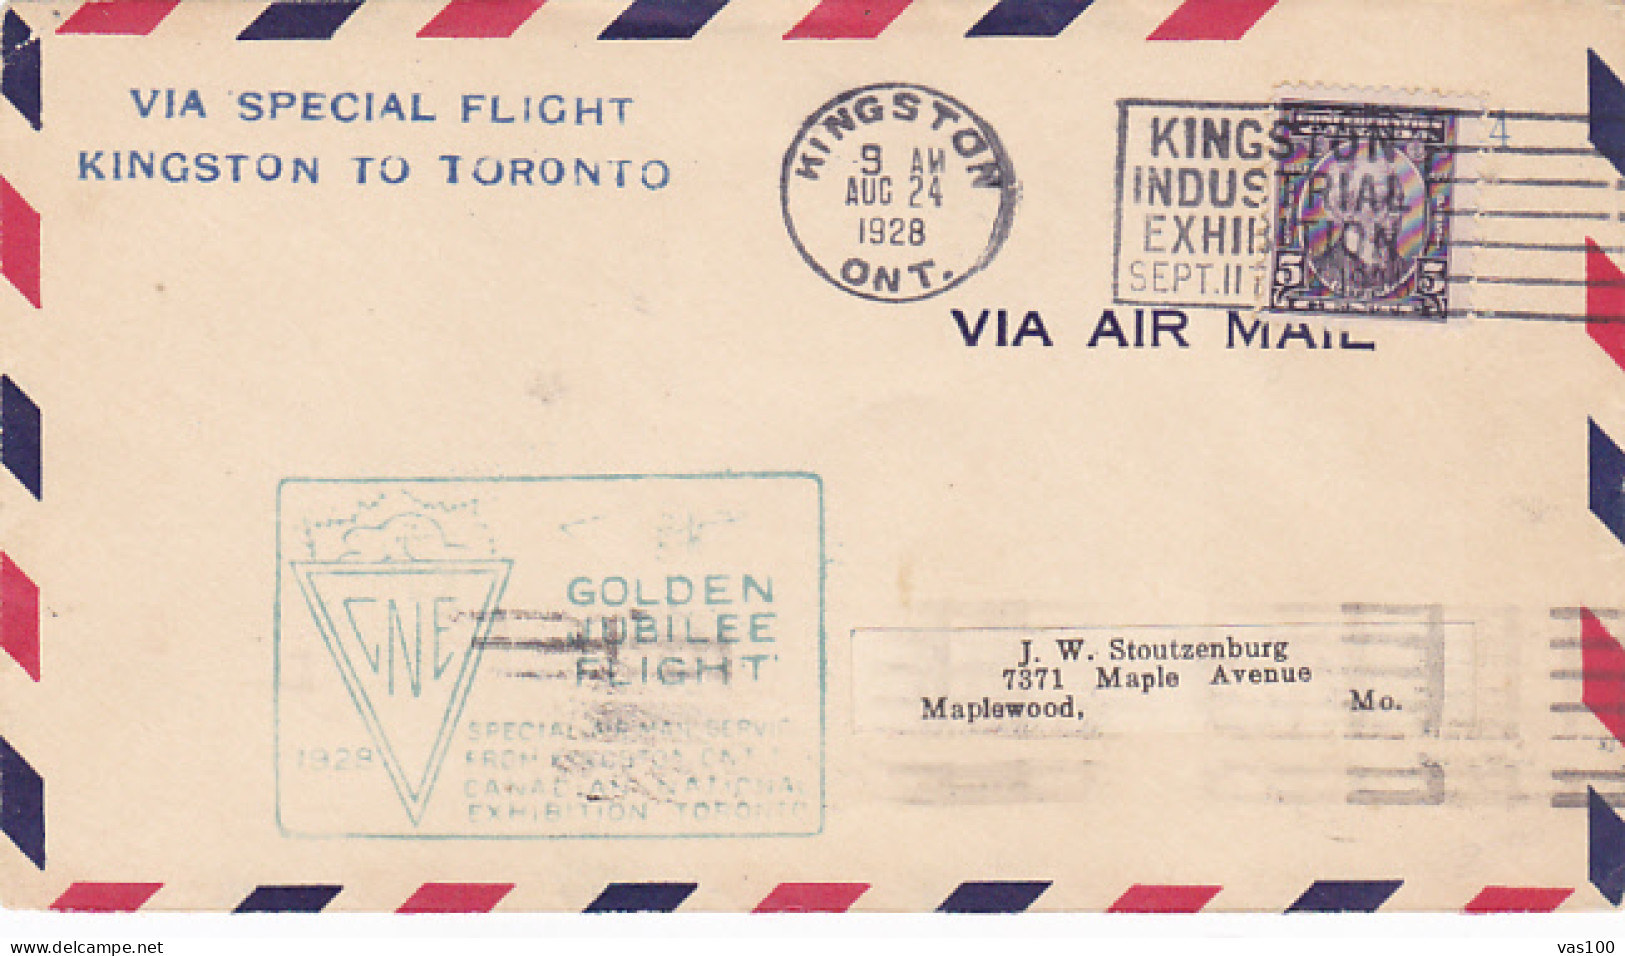 CNE GOLDEN JUBILEE FLIGHT, KINGSTON INDUSTRIAL EXHIBITION POSTMARKS, SIR LAURIER, STAMP ON COVER, 1928, CANADA - Covers & Documents